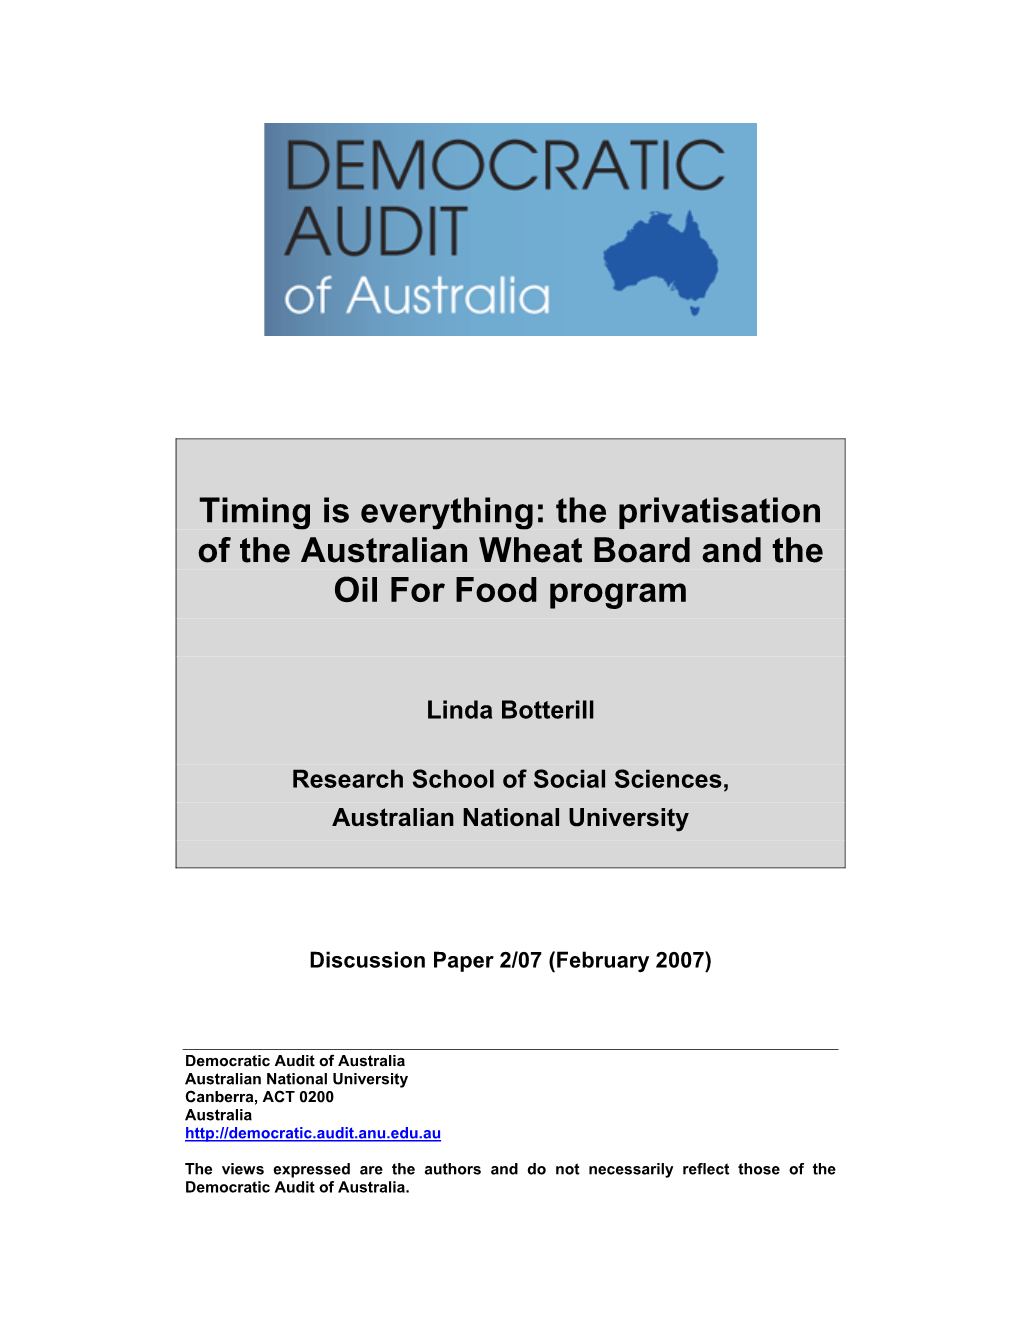 The Privatisation of the Australian Wheat Board and the Oil for Food Program